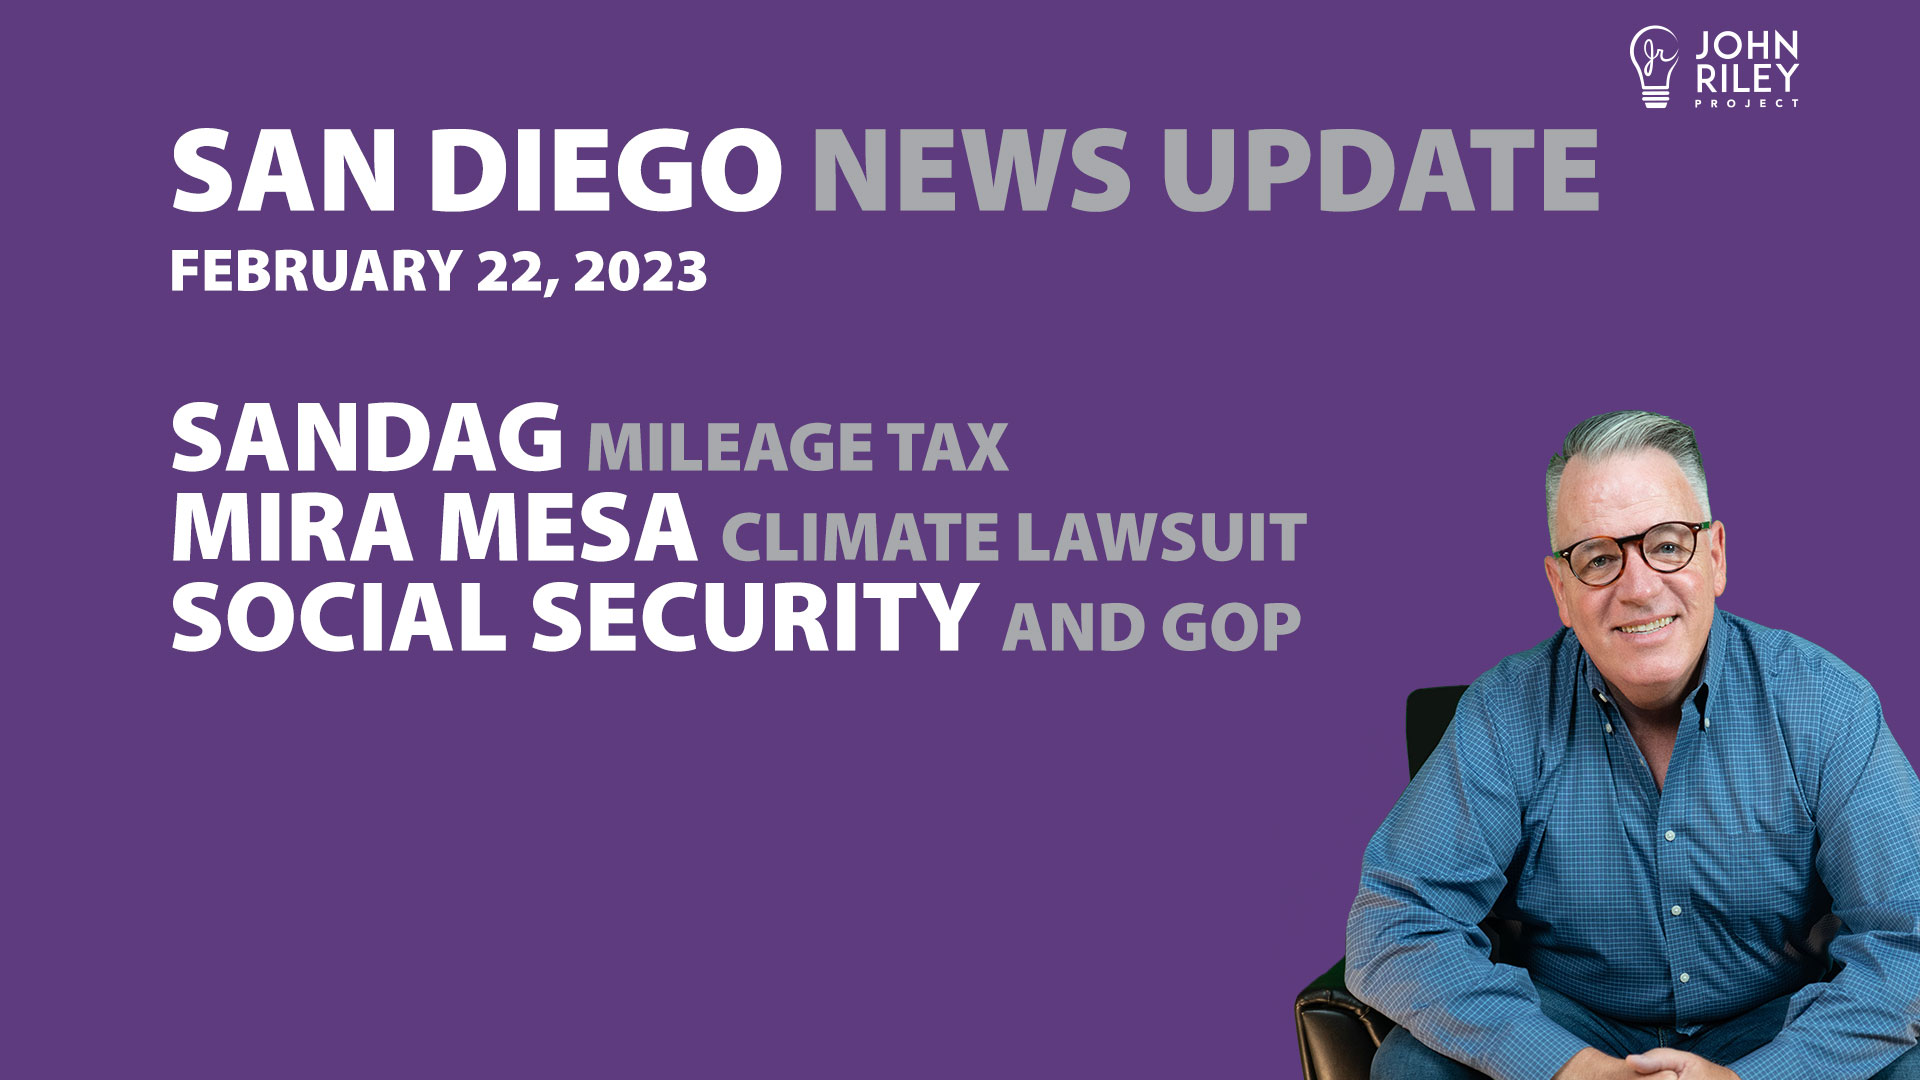 SANDAG mileage tax, climate change and housing in Mira Mesa, GOP and Social Security